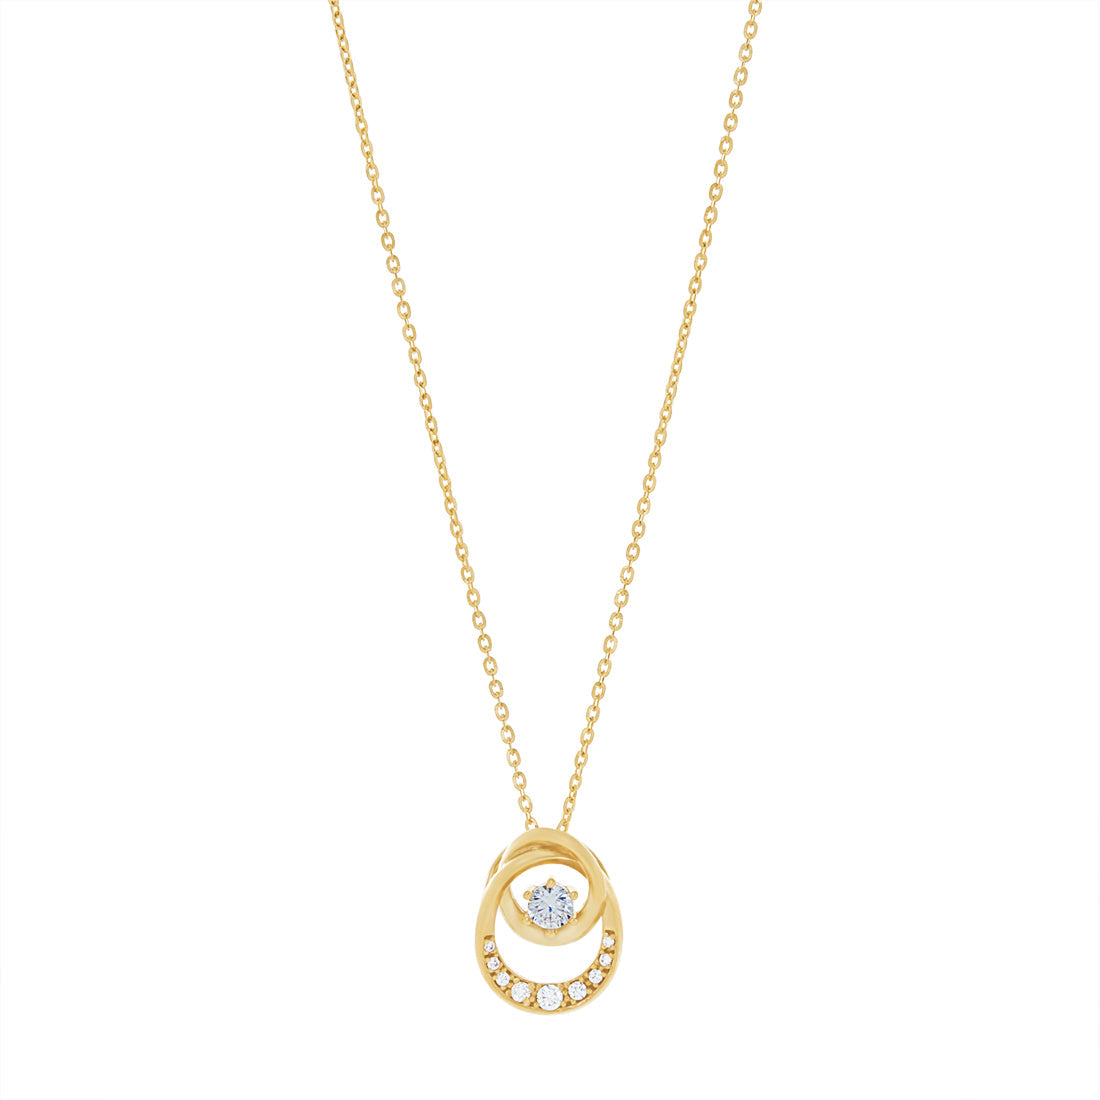 9ct Yellow Gold Silver Infused Circular Pendant with Cubic Zirconia Necklaces Bevilles 